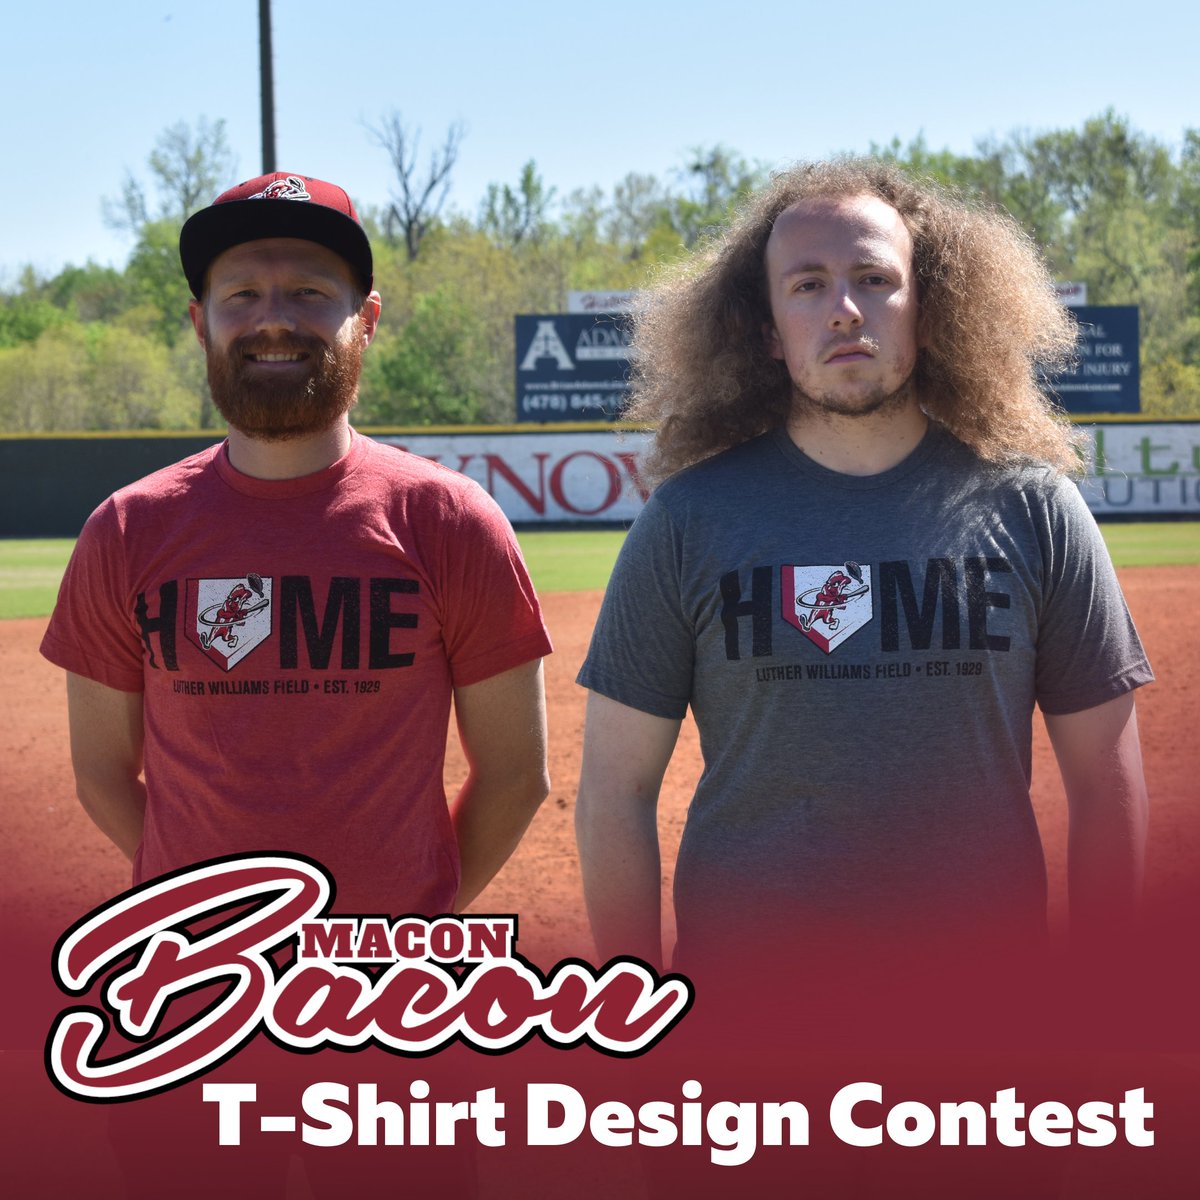 BREAKING: We're bringing back our Design-a-Shirt Contest! Every year, our fan-designed t-shirt is one of our best-selling items. The creativity of Bacon Nation always results in a great design, and we're sure this year will be no exception. Enter now: maconbaconbaseball.com/tshirt-design/